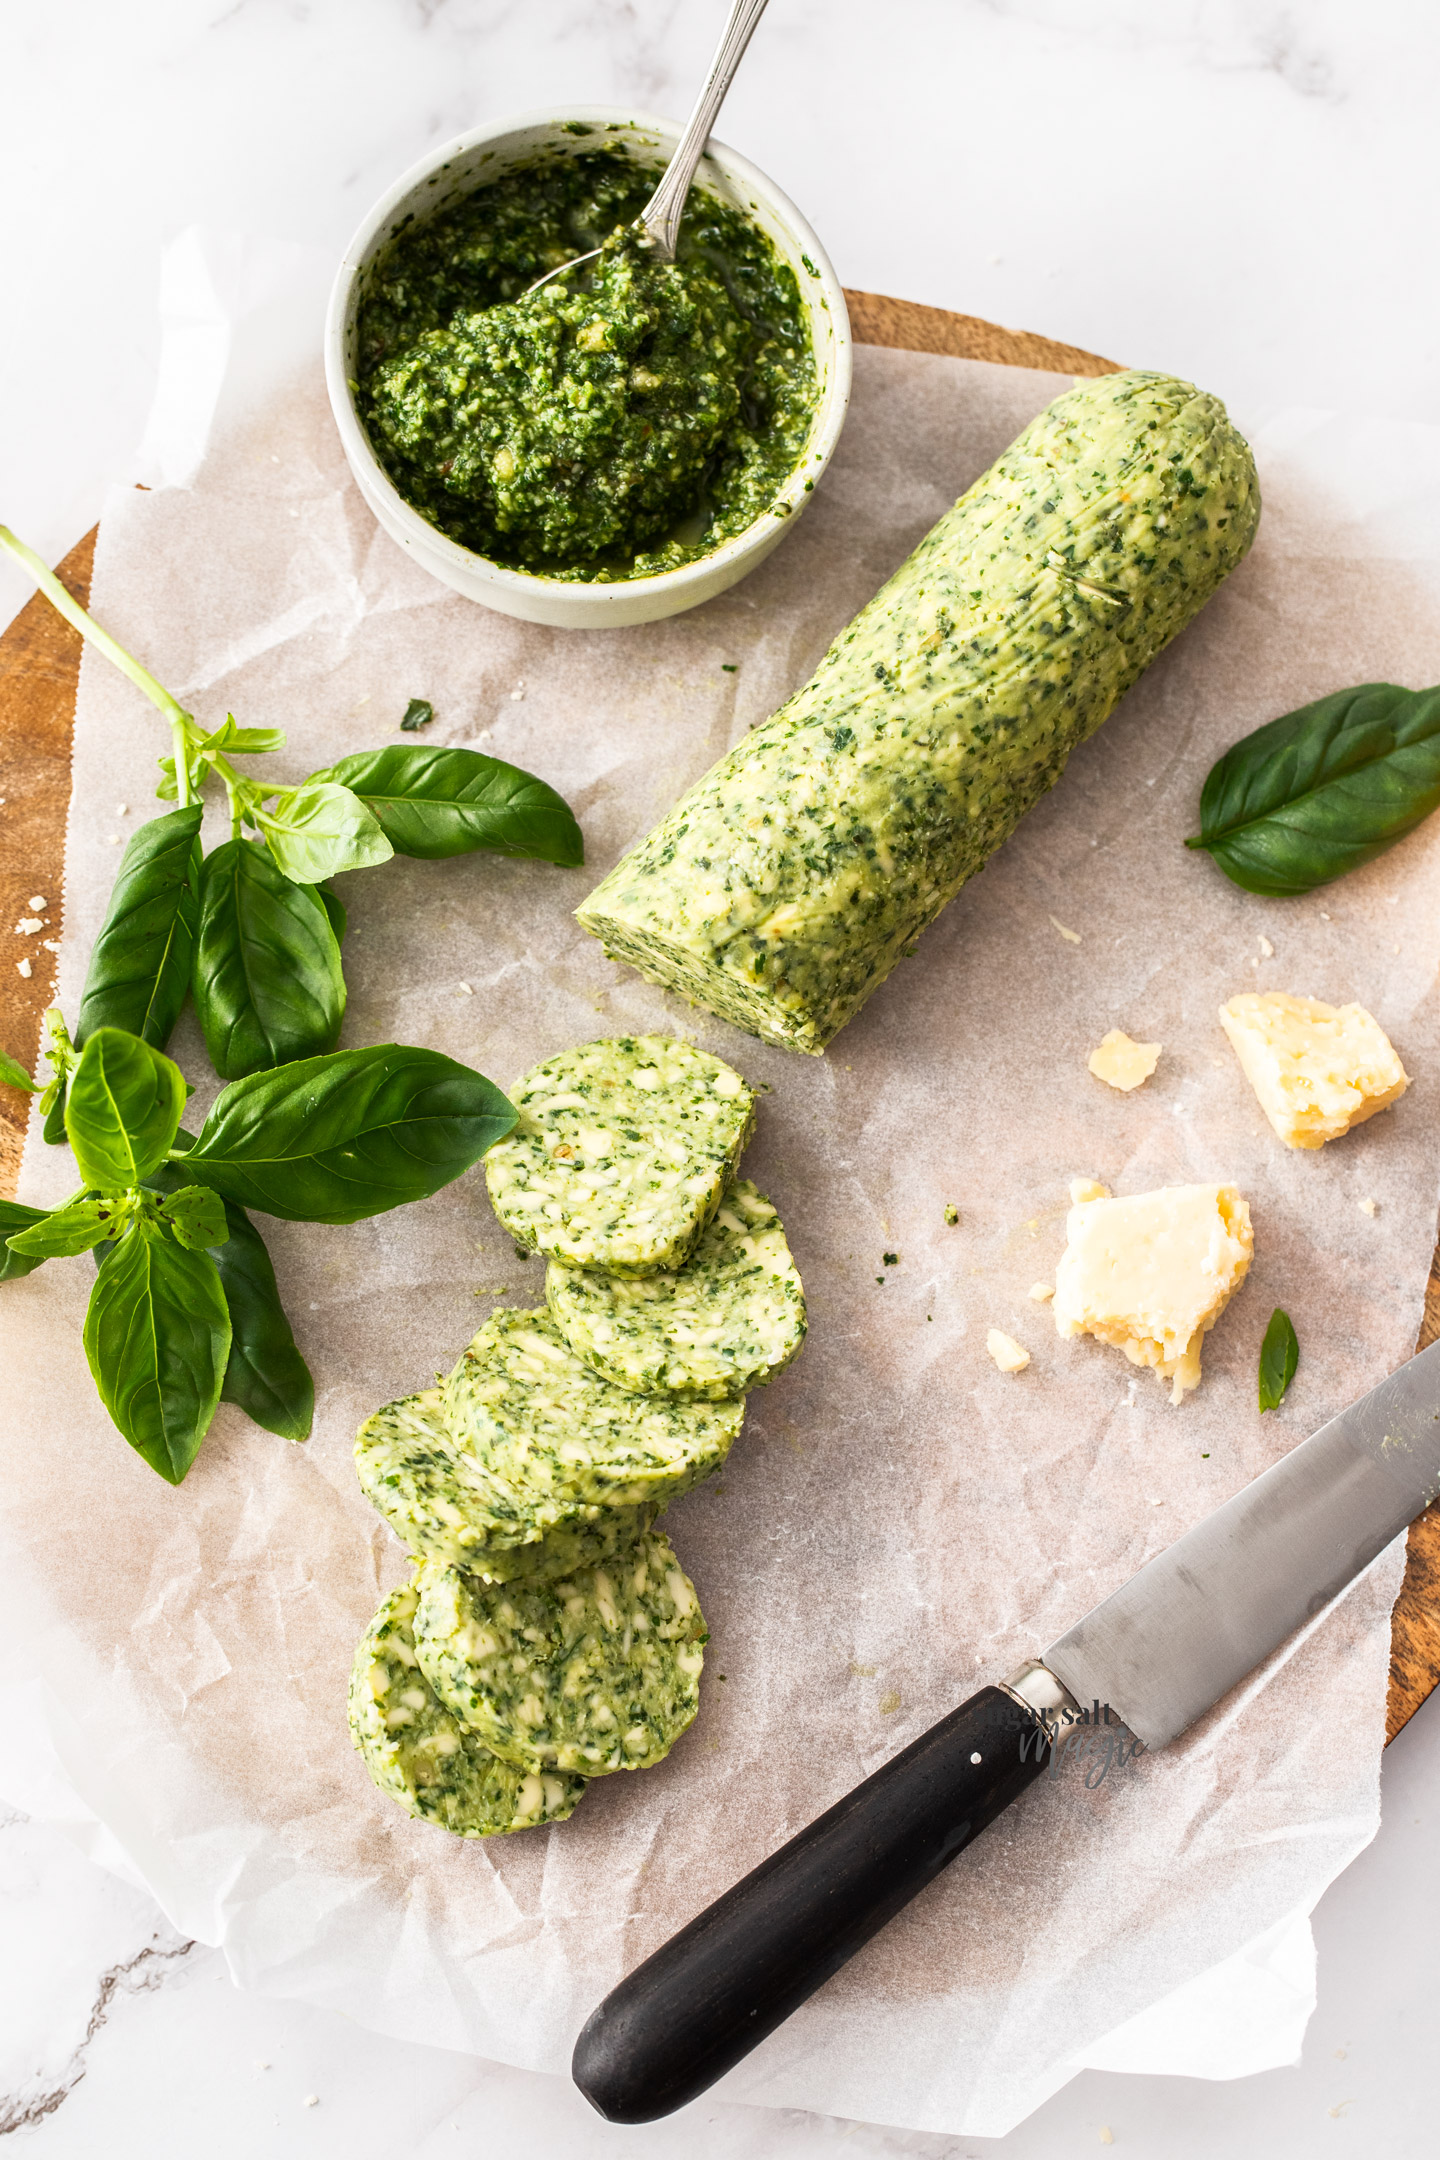 A log of pesto butter on a chopping board with some disks cut from it.